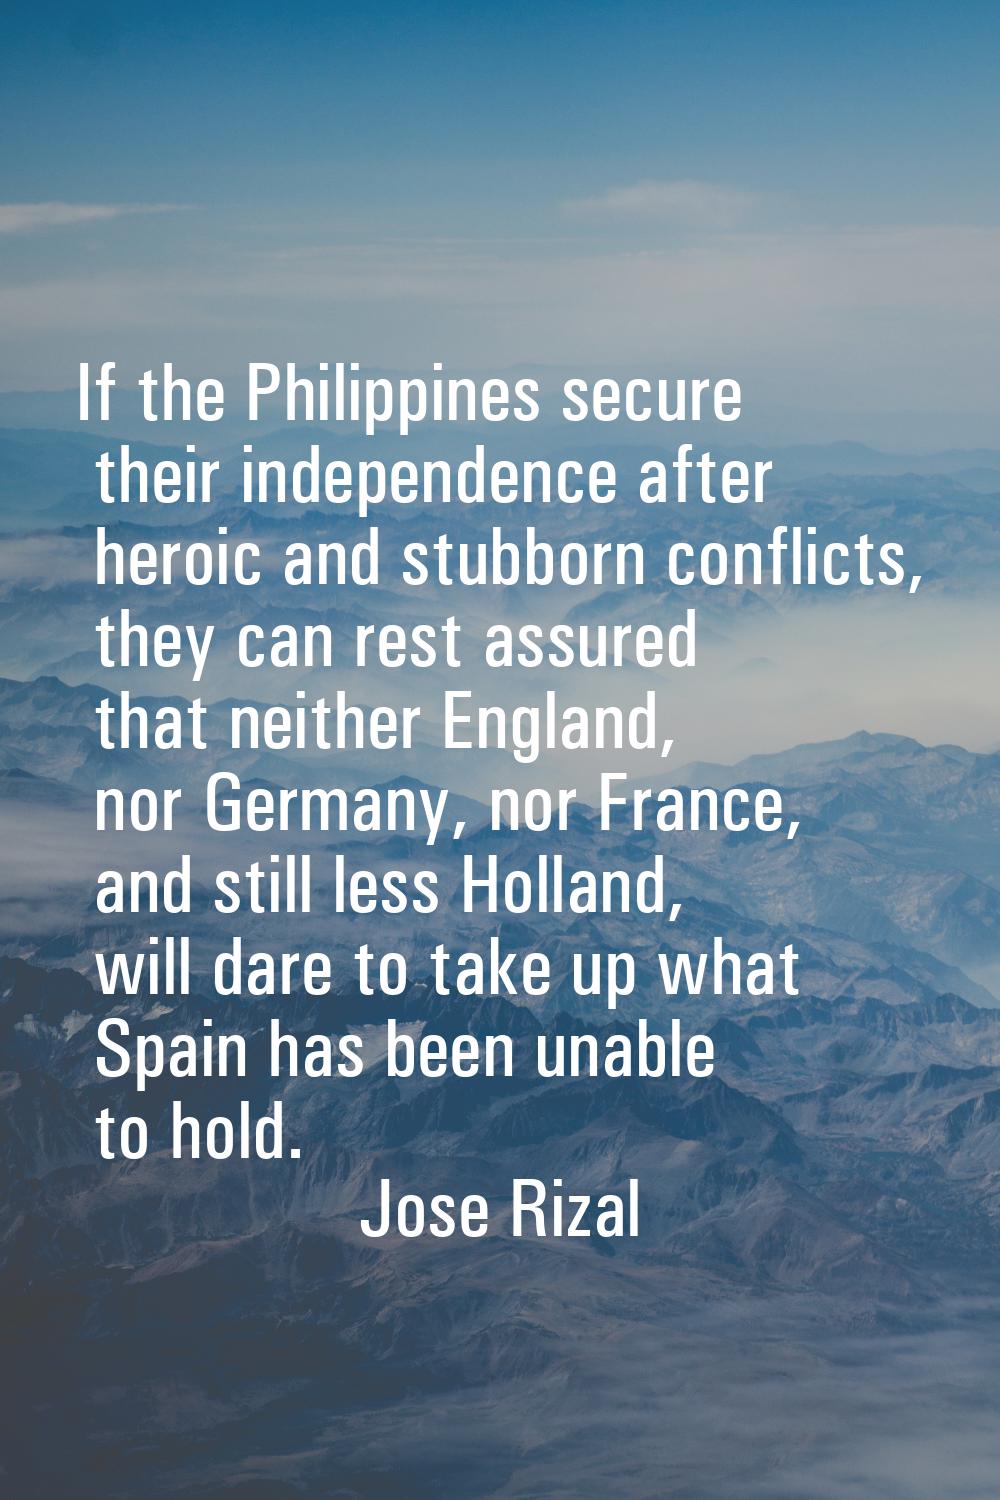 If the Philippines secure their independence after heroic and stubborn conflicts, they can rest ass